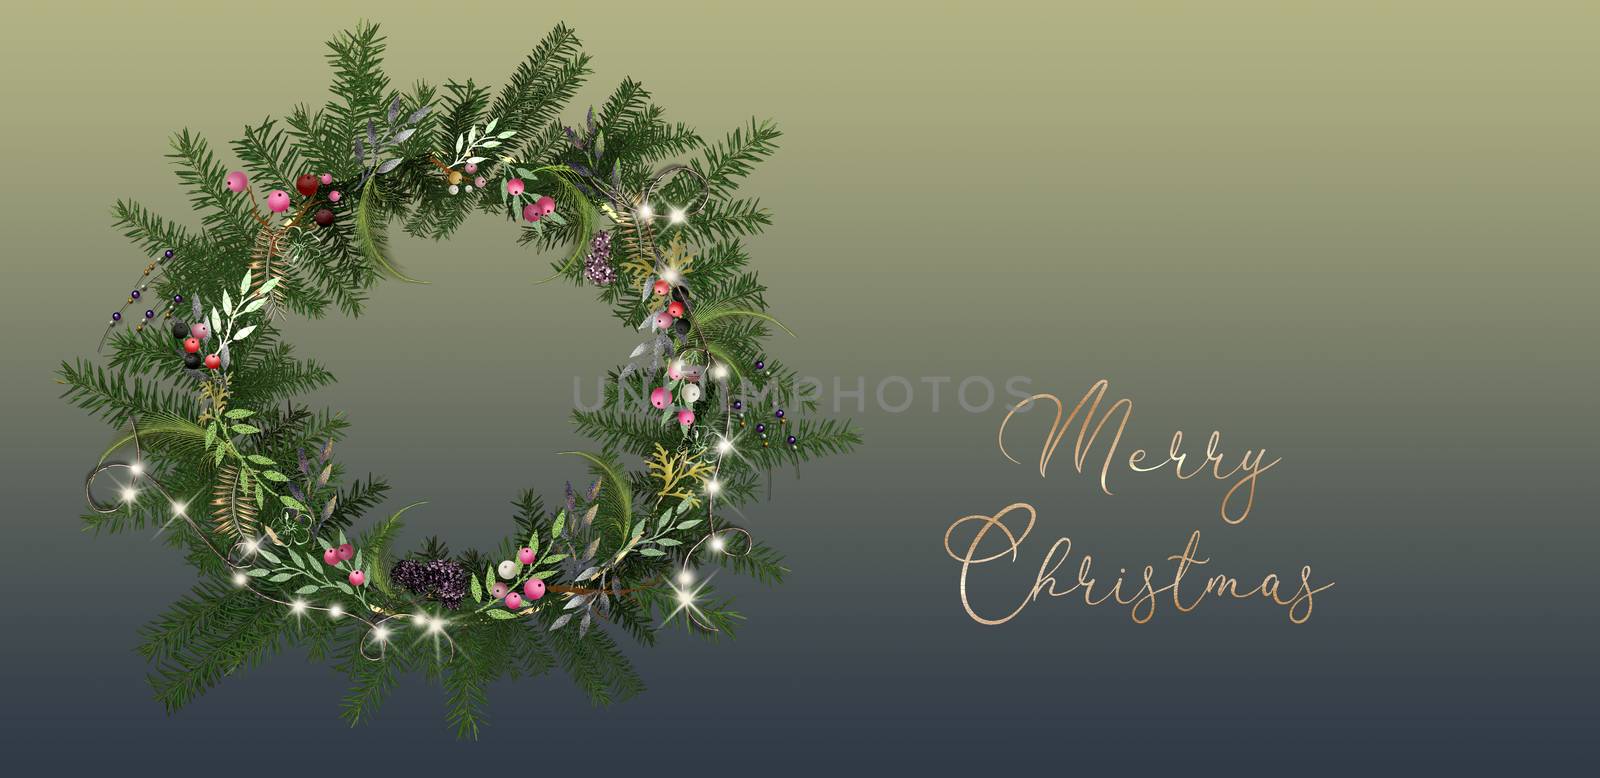 Christmas banner with wreath by NelliPolk